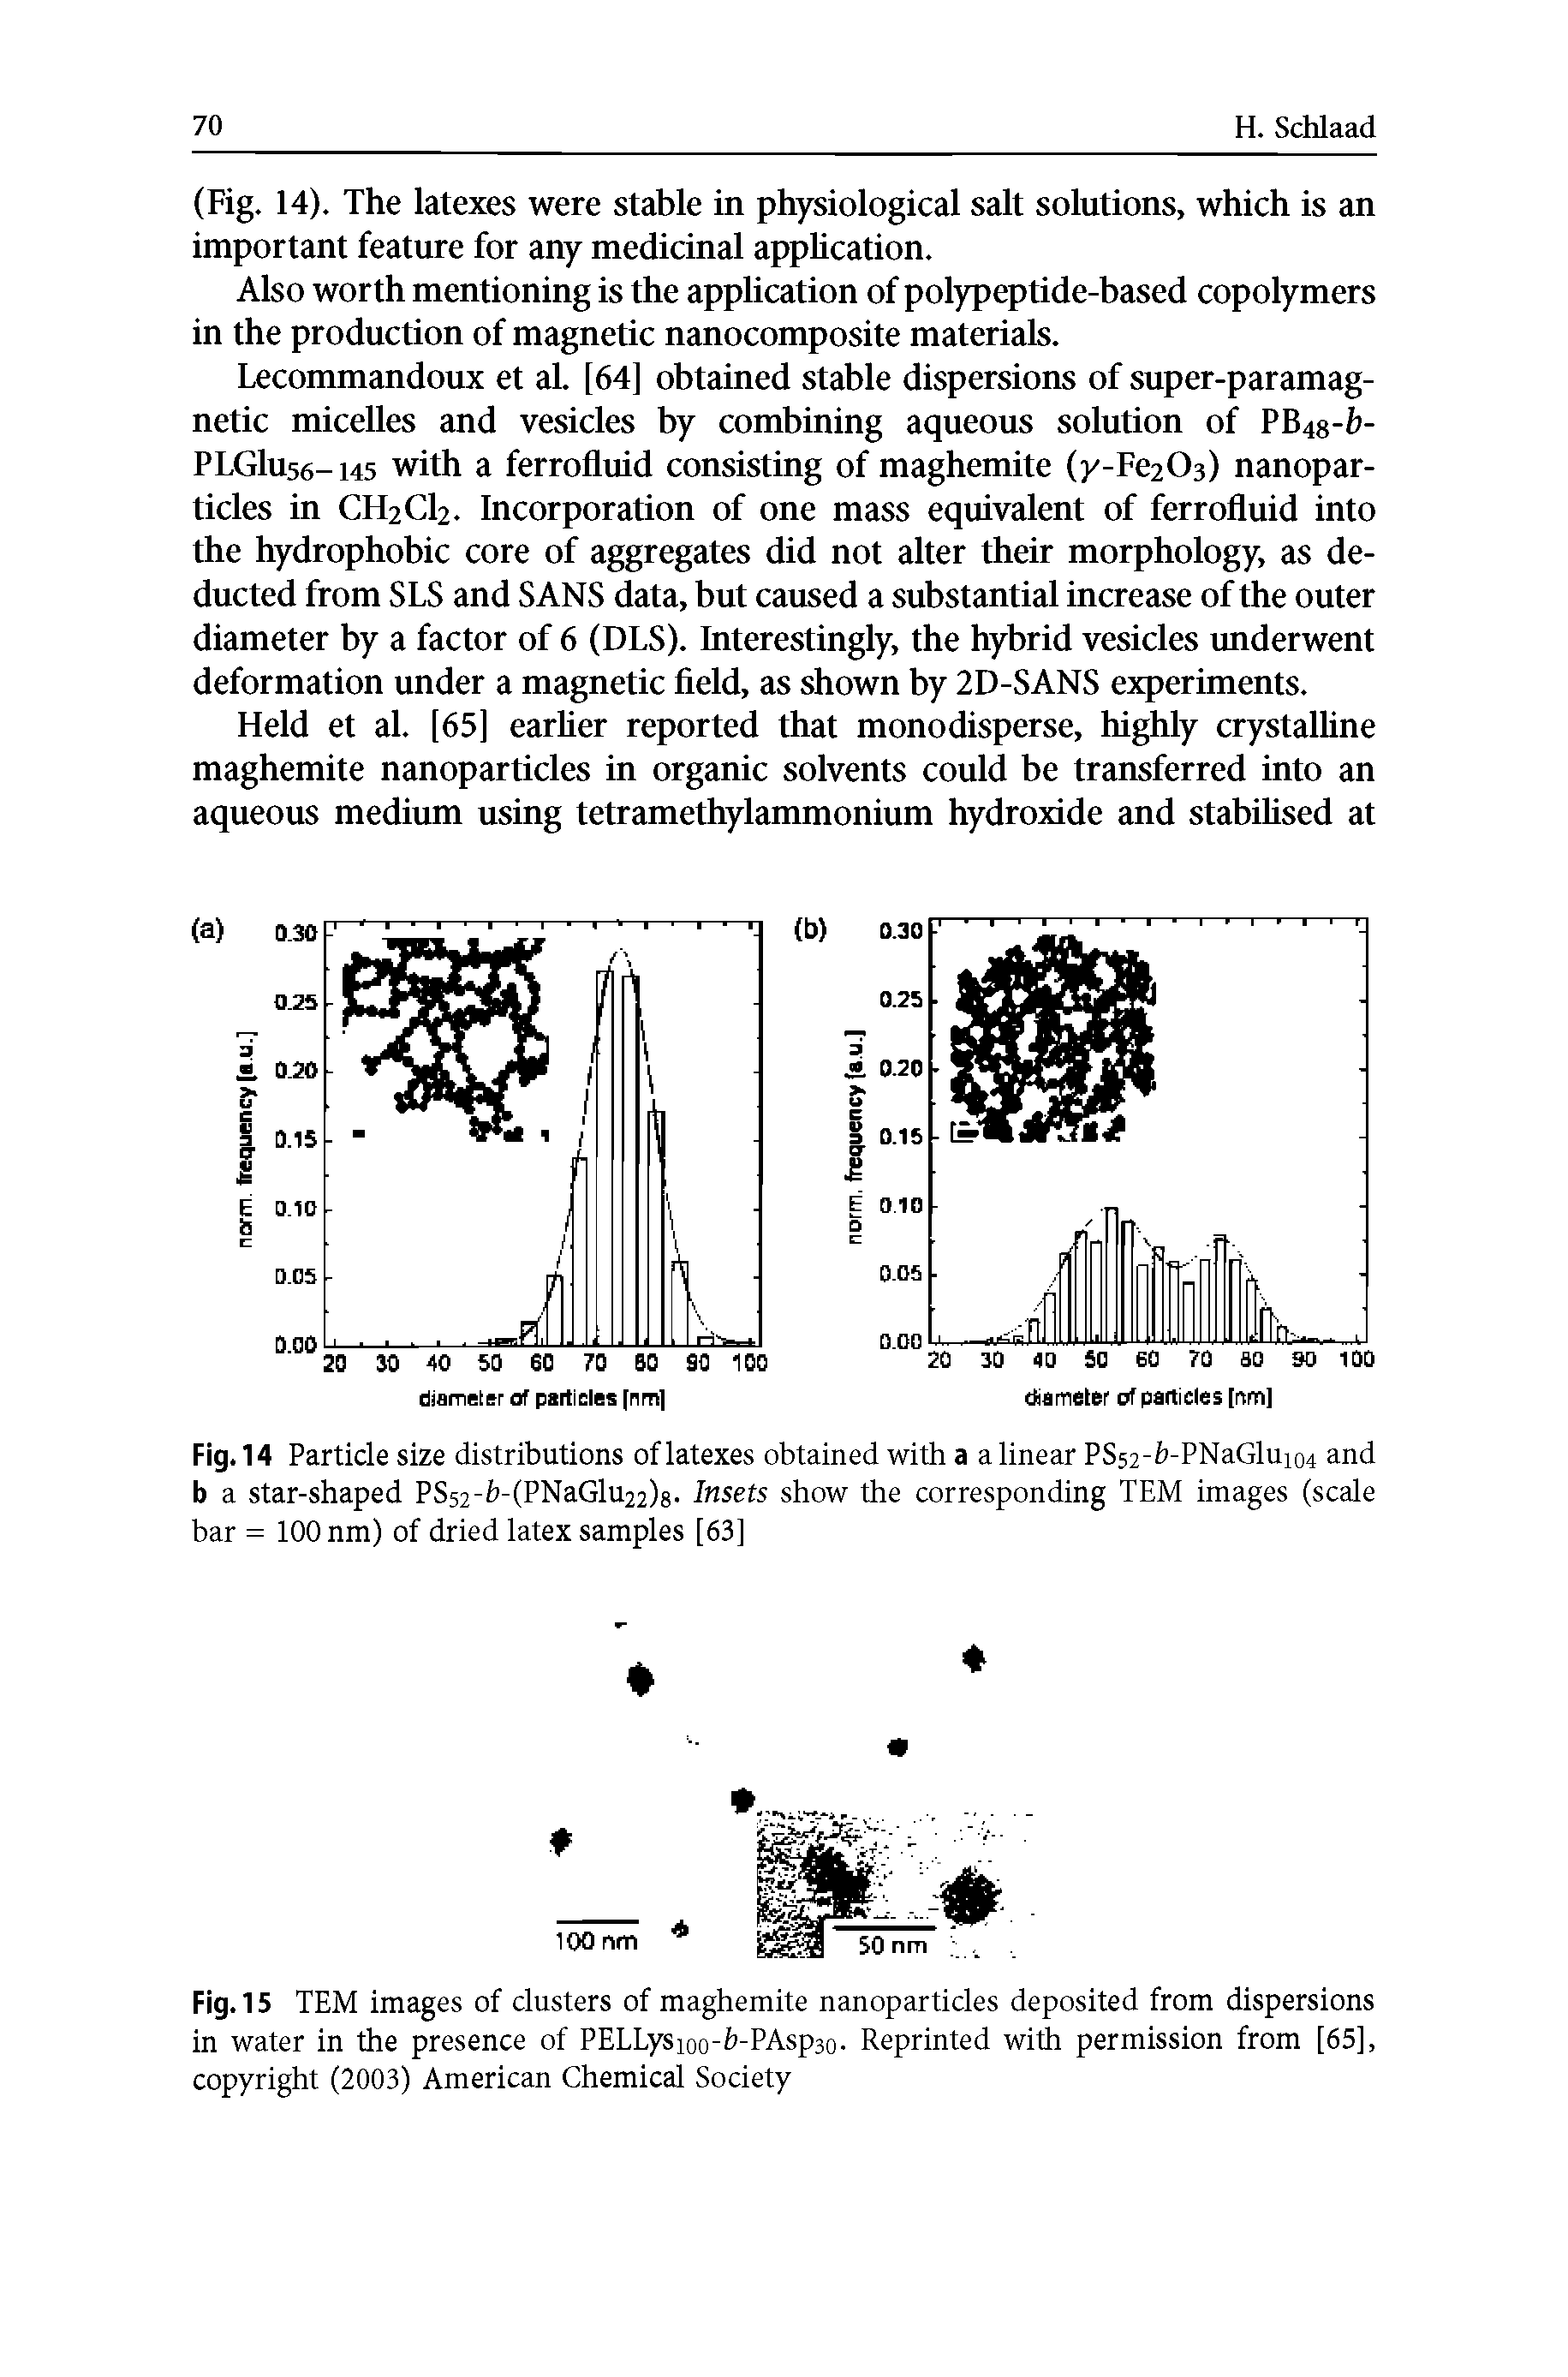 Fig. 15 TEM images of clusters of maghemite nanoparticles deposited from dispersions in water in the presence of PELLysioo-fc-PAspso. Reprinted with permission from [65], copyright (2003) American Chemical Society...